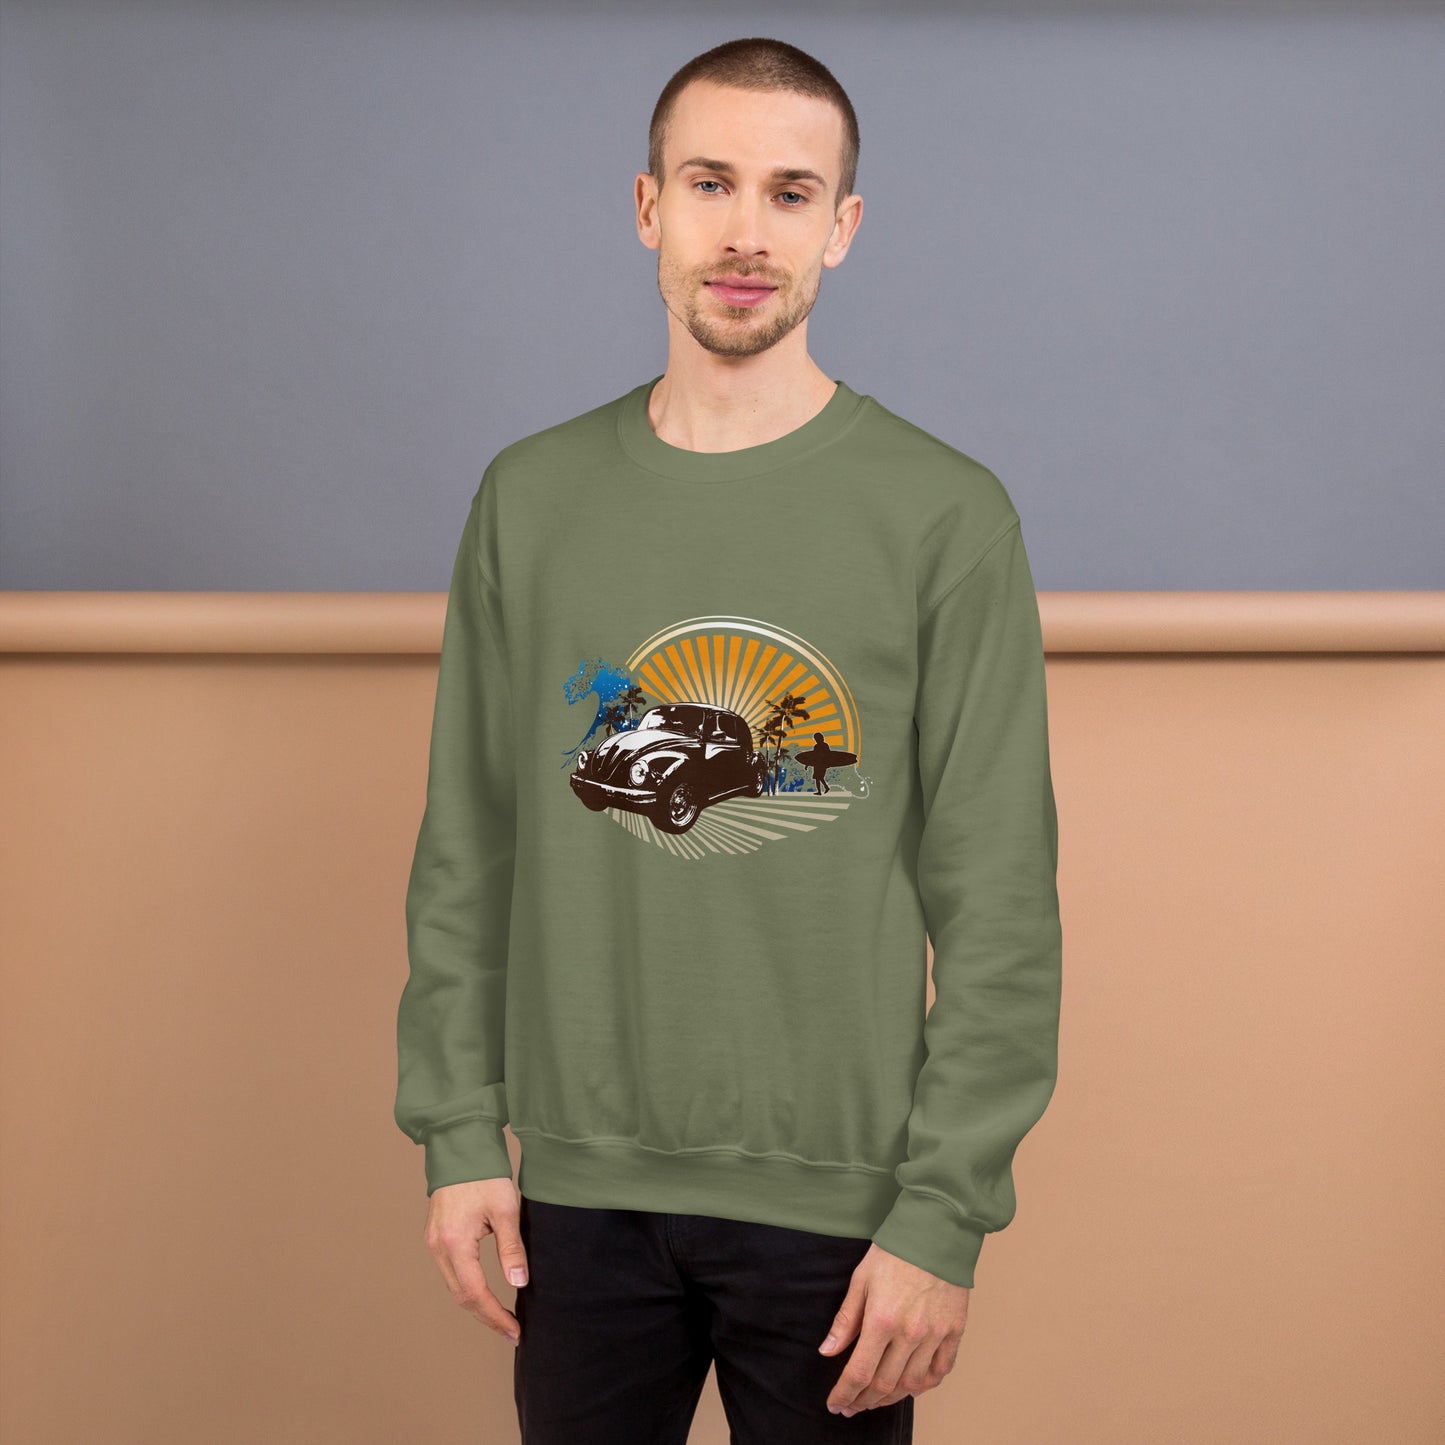 Men with military green sweatshirt with sunset and beetle car